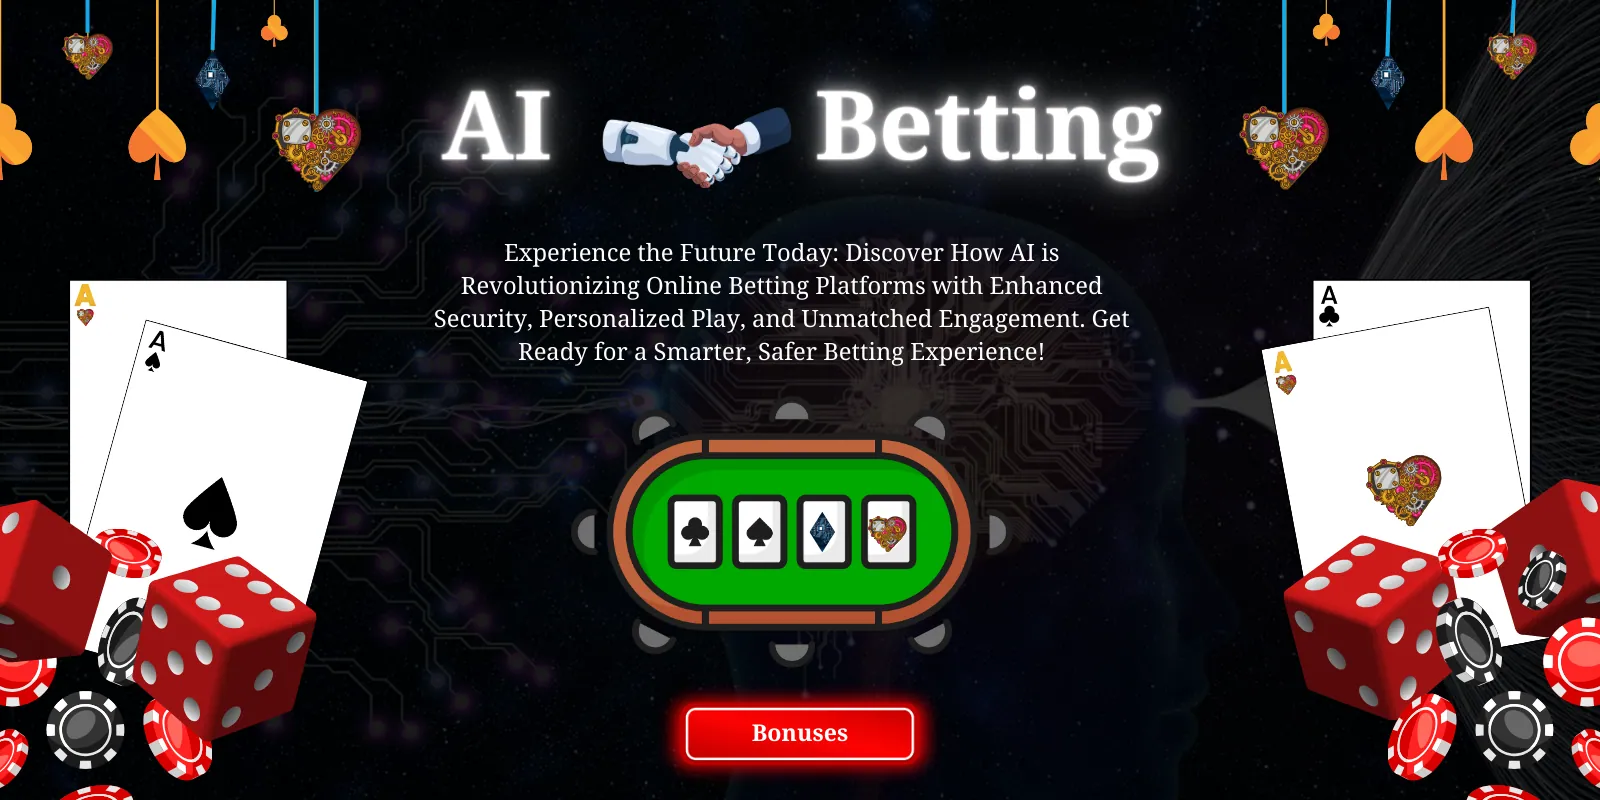 How AI is Revolutionizing Online Betting Platforms